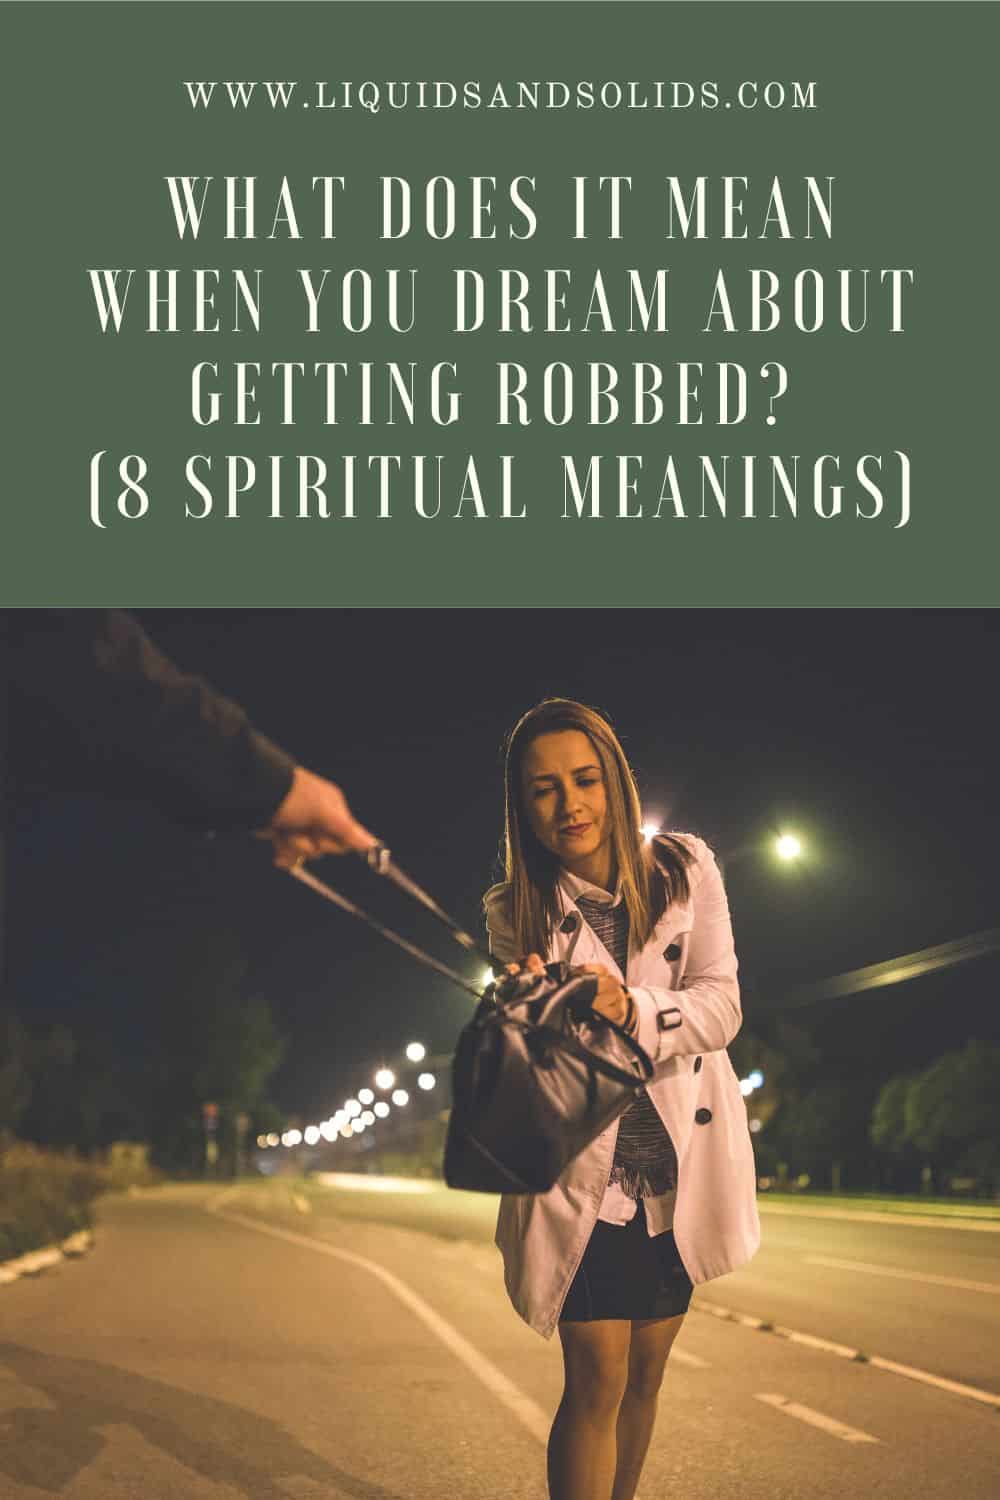 What Does It Mean When You Dream About Getting Robbed? (8 Spiritual Meanings)